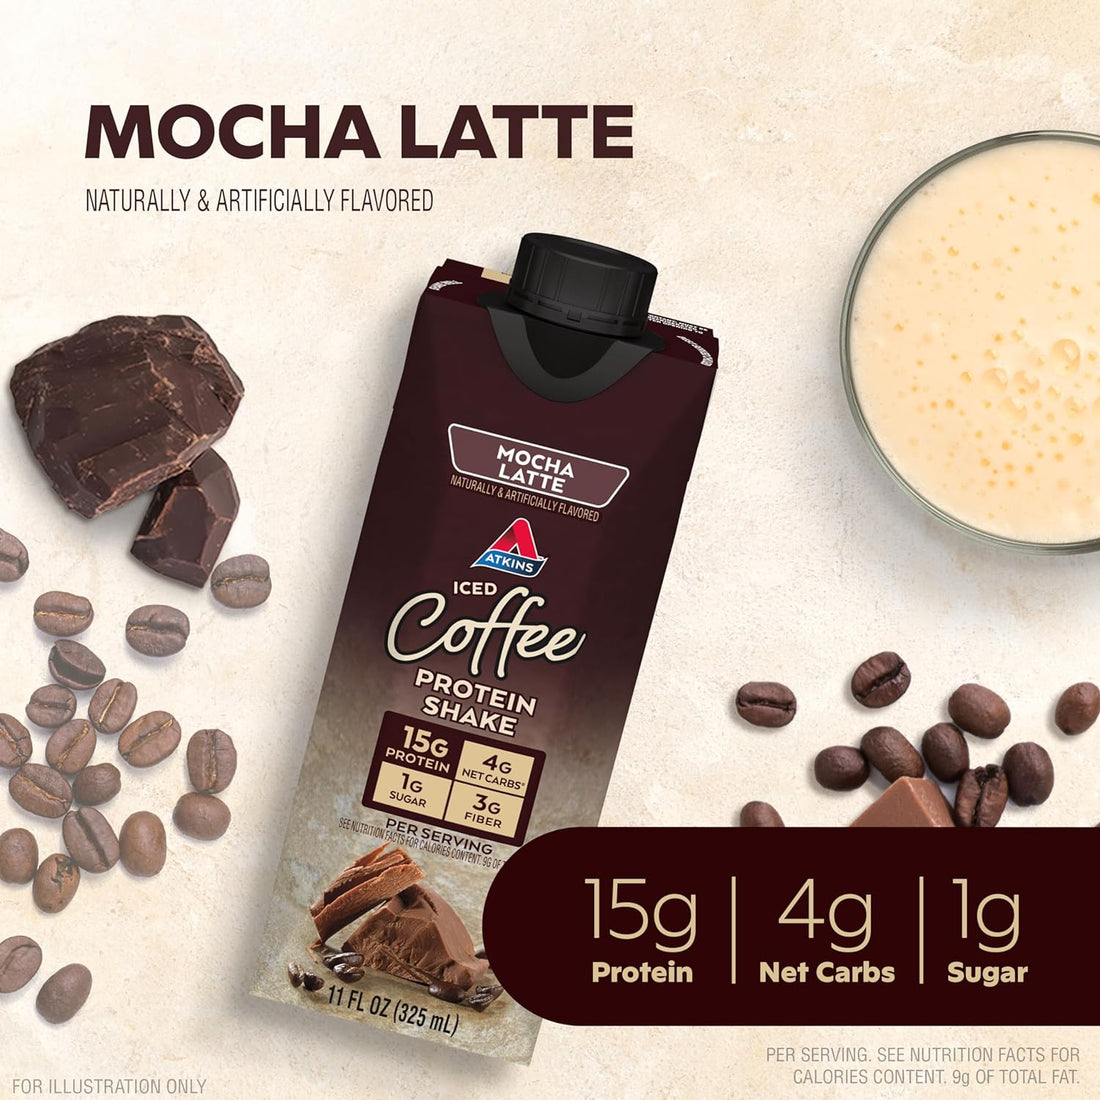 Atkins Iced Coffee Mocha Latte Protein-rich Shake, With Coff